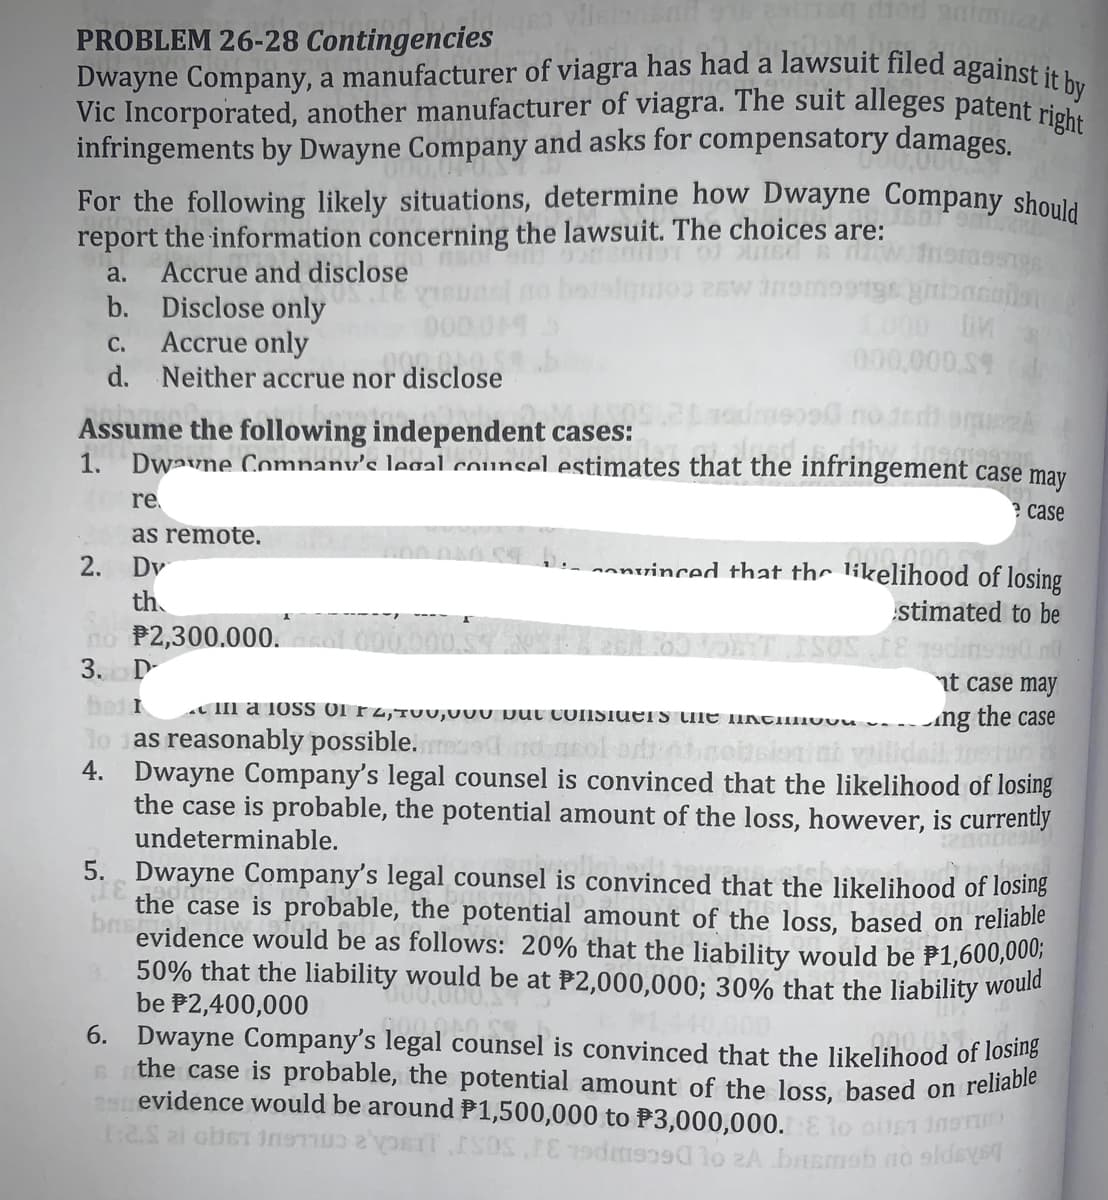 the case is probable, the potential amount of the loss, based on reliable
PROBLEM 26-28 Contingencies
Vic Incorporated, another manufacturer of viagra. The suit alleges patent right
Dwayne Company, a manufacturer of viagra has had a lawsuit filed against it by
oru bec
infringements by Dwayne Company and asks for compensatory damages.
For the following likely situations, determine how Dwayne Company should
report the information concerning the lawsuit. The choices are:
a.
Accrue and disclose
combijeroq
b. Disclose only
Accrue only
d. Neither accrue nor disclose
1000 iM
000,000,S9
С.
Assume the following independent cases:
1. Dwavne Comnany's legal counsel estimates that the infringement case may
re
? case
as remote.
2. Dv
- onvinced that the likelihood of losing
th
no P2,300.000.
3.
stimated to be
D-
nt case may
bed I
TII a 10SS Of rz,TUU,UU0 put CONSIUETS tilE IKTIIuuu v-
Ang the case
lo as reasonably possible. red nd neol.
4. Dwayne Company's legal counsel is convinced that the likelihood of losing
the case is probable, the potential amount of the loss, however, is currently
undeterminable.
5. Dwayne Company's legal counsel is convinced that the likelihood of losing
the case is probable, the potential amount of the loss, based on reliable
brst
evidence would be as follows: 20% that the liability would be P1,600,000;
50% that the liability would be at P2,000,000; 30% that the liability would
be P2,400,000
6. Dwayne Company's legal counsel is convinced that the likelihood of losiig
evidence would be around P1,500,000 to P3,000,000.
290
t:2.S ai ober InsTu IT
